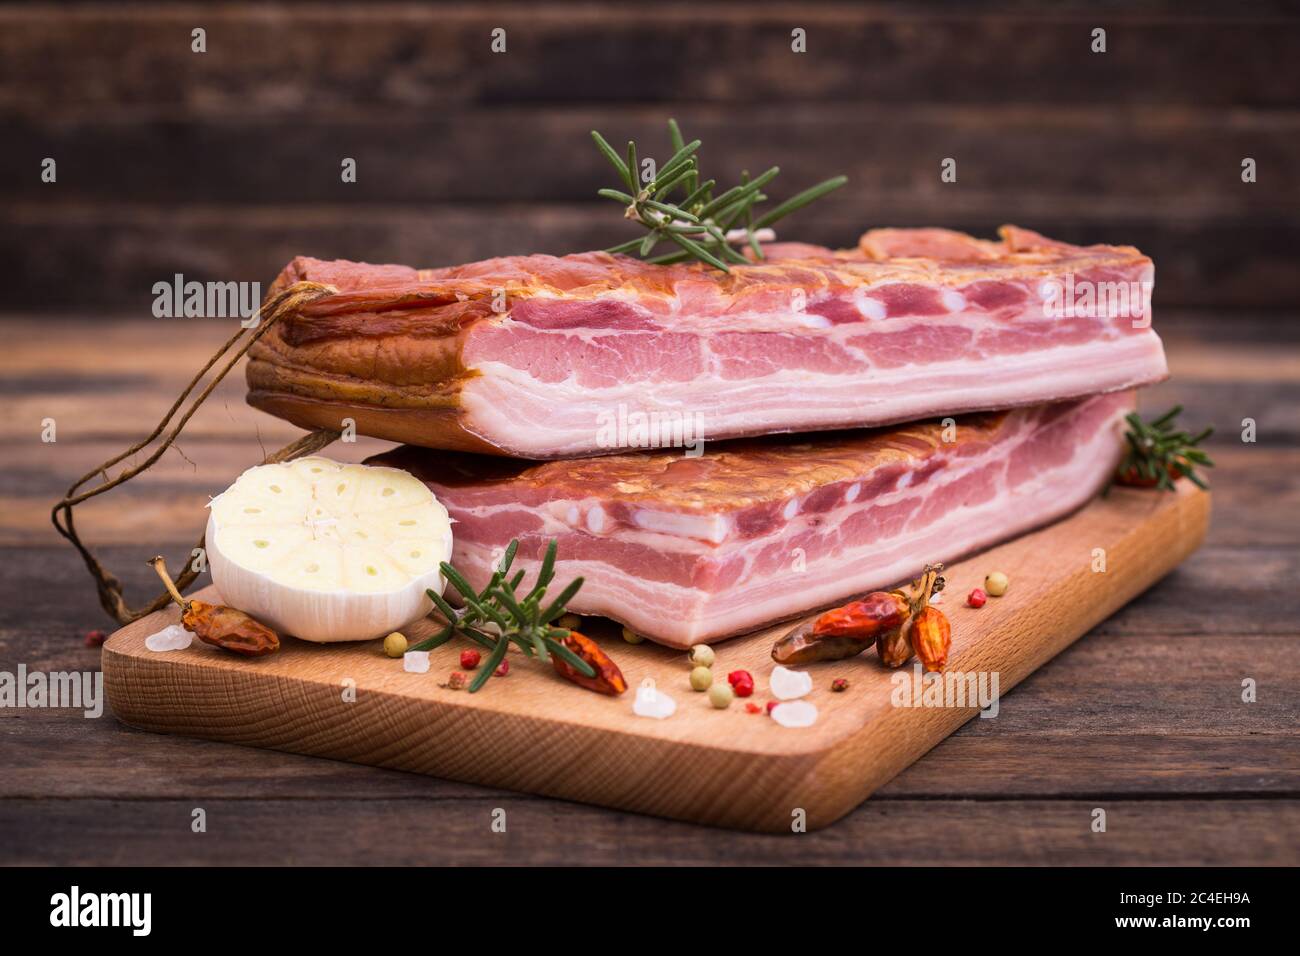 Homemade smoked bacon on wooden board Stock Photo